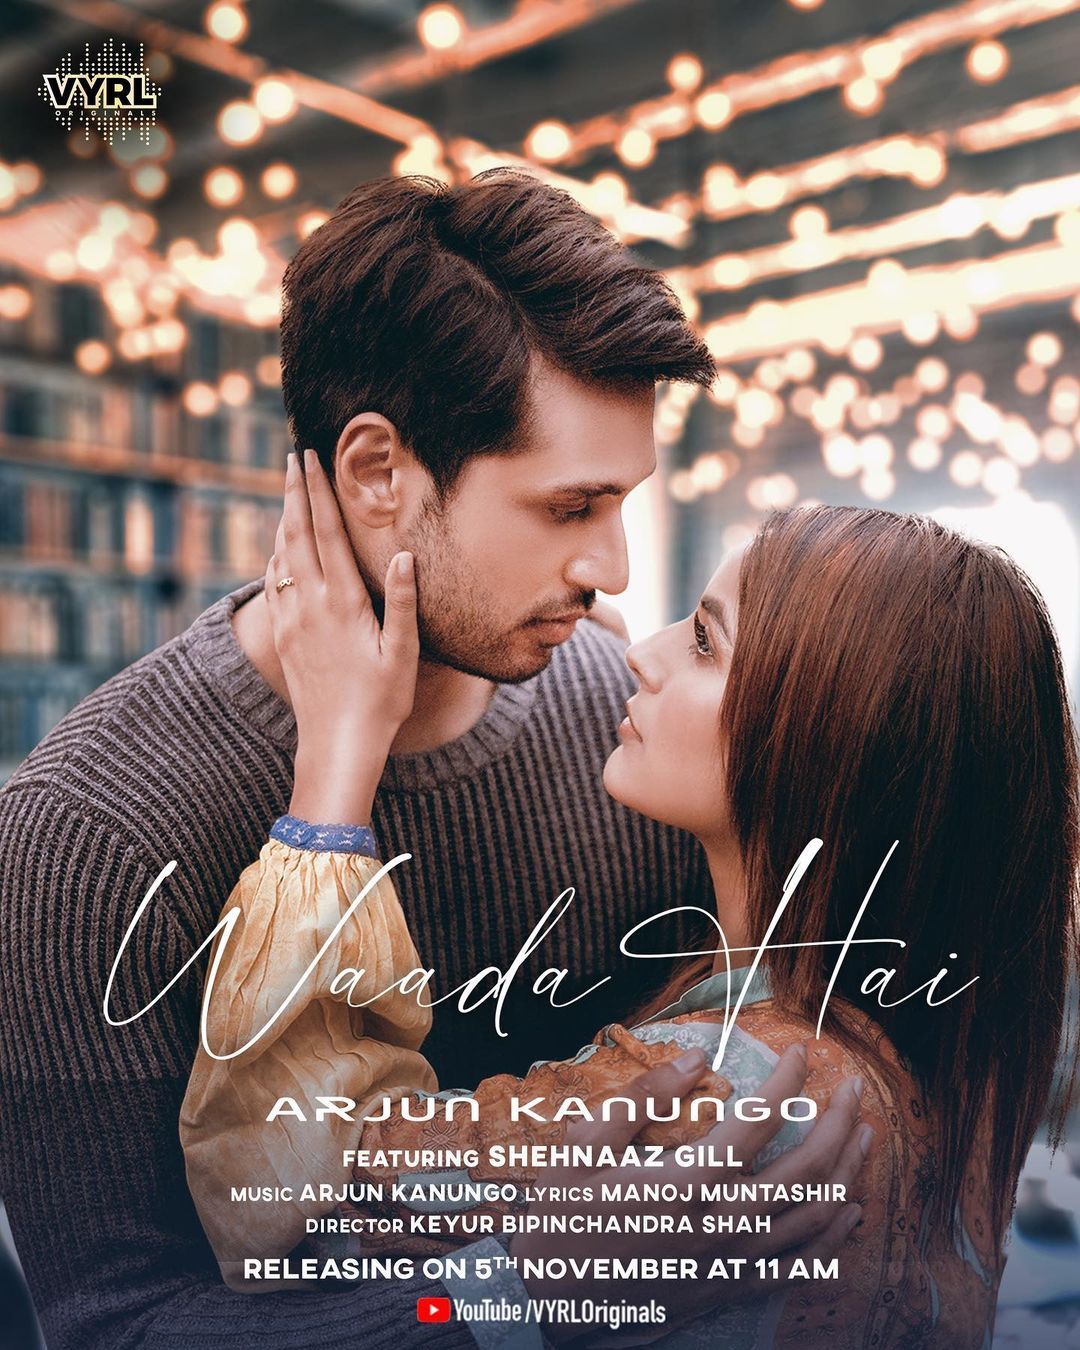 Shehnaaz Gill And Arjun Kanungo Look Made For Each Other In The Poster Of Their Music Video Waada Hai